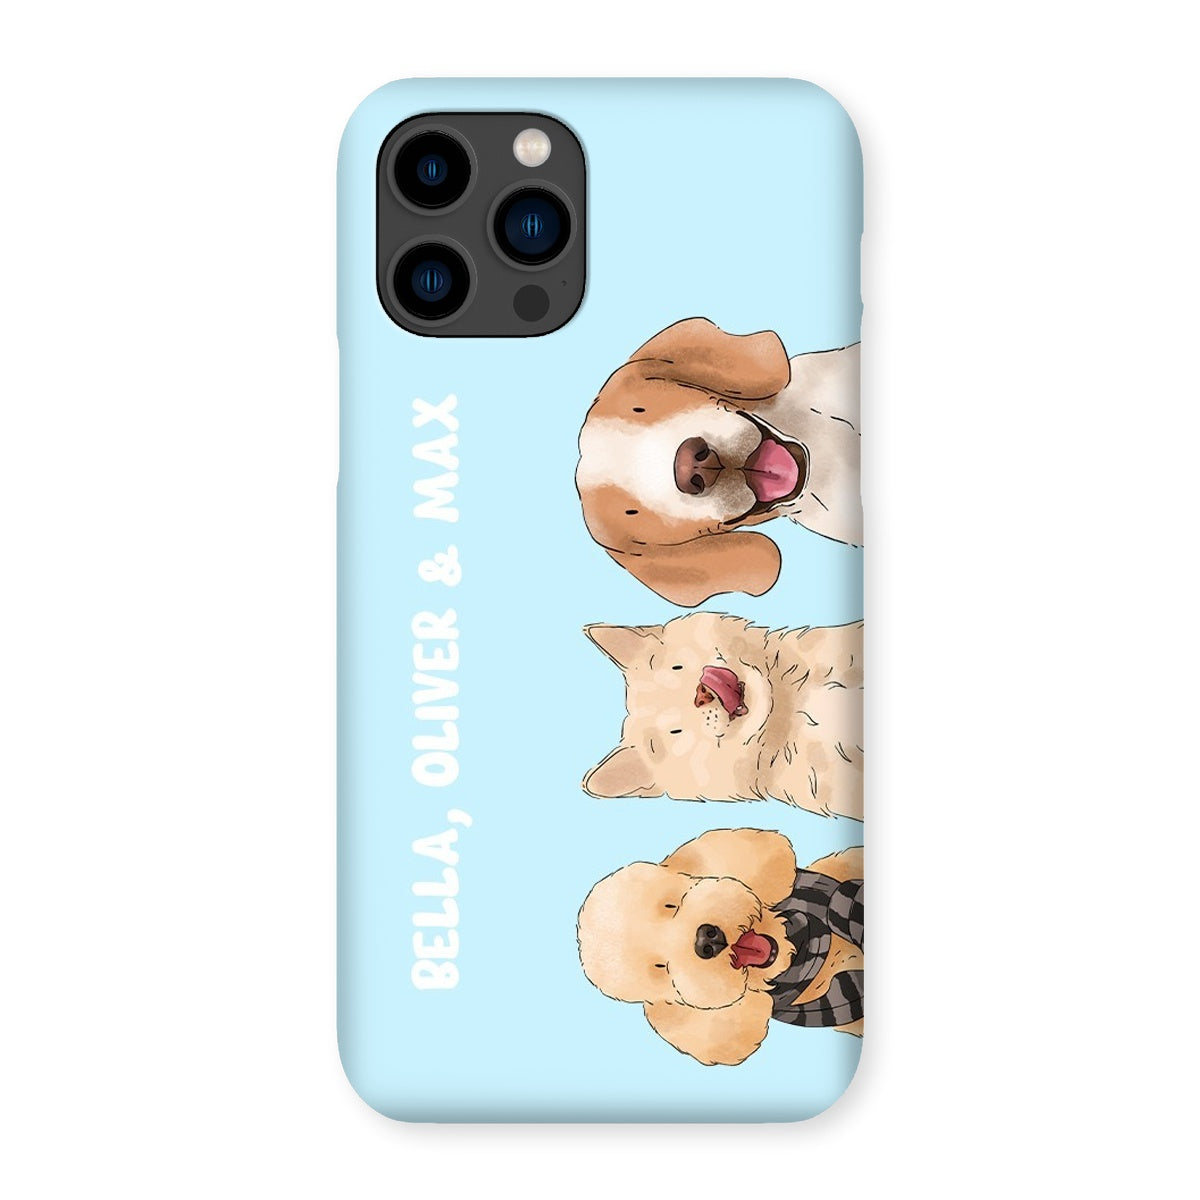 Paw & Glory, paw and glory, personalized puppy phone case, personalised dog phone case uk, life is better with a dog phone case, dog mum phone case, dog phone case custom, personalised iphone 11 case dogs, Pet Portraits phone case